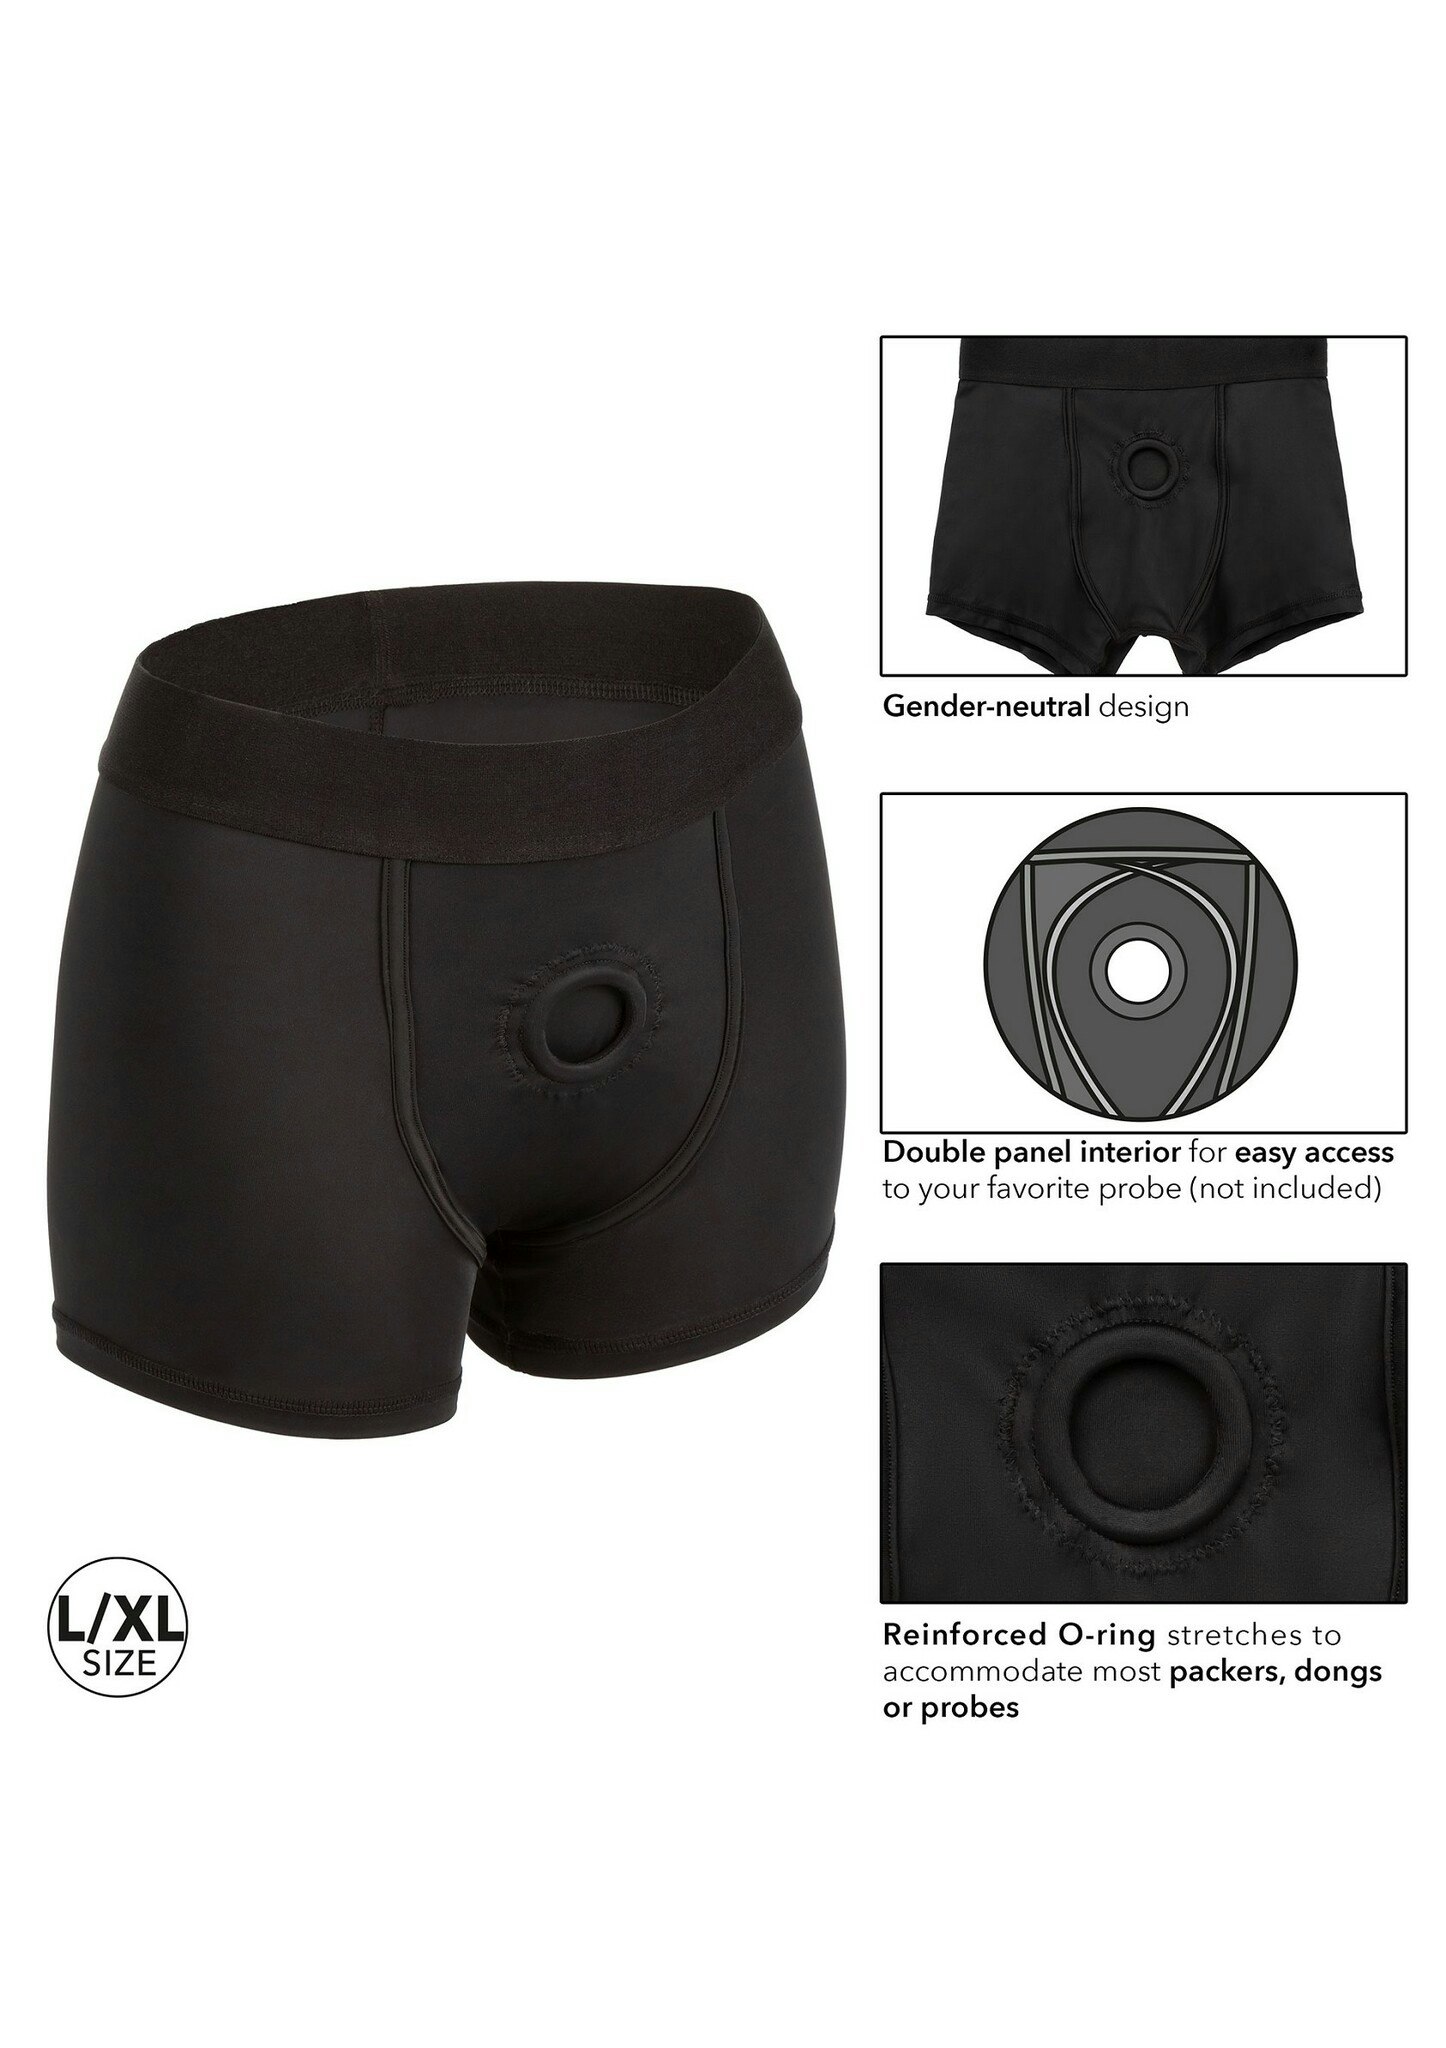 Her Royal Harness - Boxer Brief, L/XL